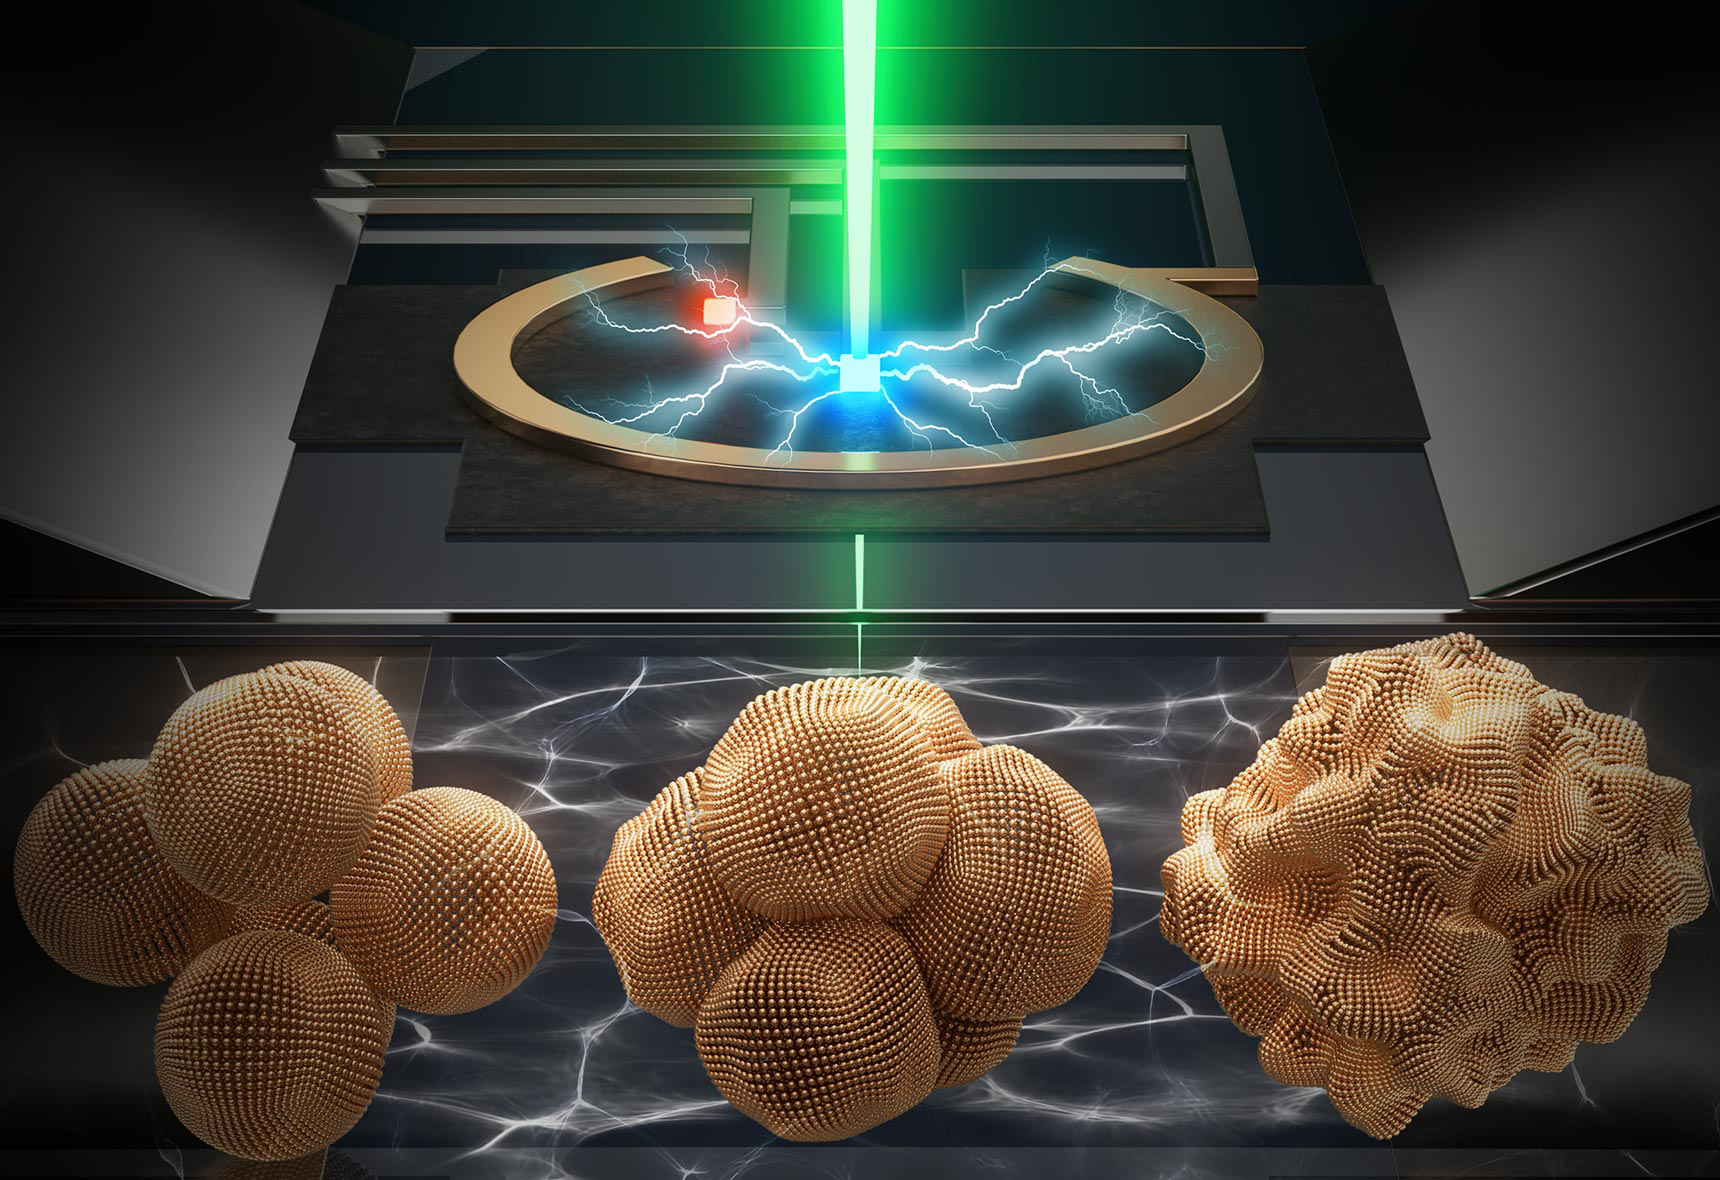 Inside a stylized electrochemical liquid cell, six copper nanoparticles (each one depicted as a ball composed of many copper-colored “atoms”) merge in steps (left to right) into one large, irregularly shaped nanograin as a green beam shines down from above.